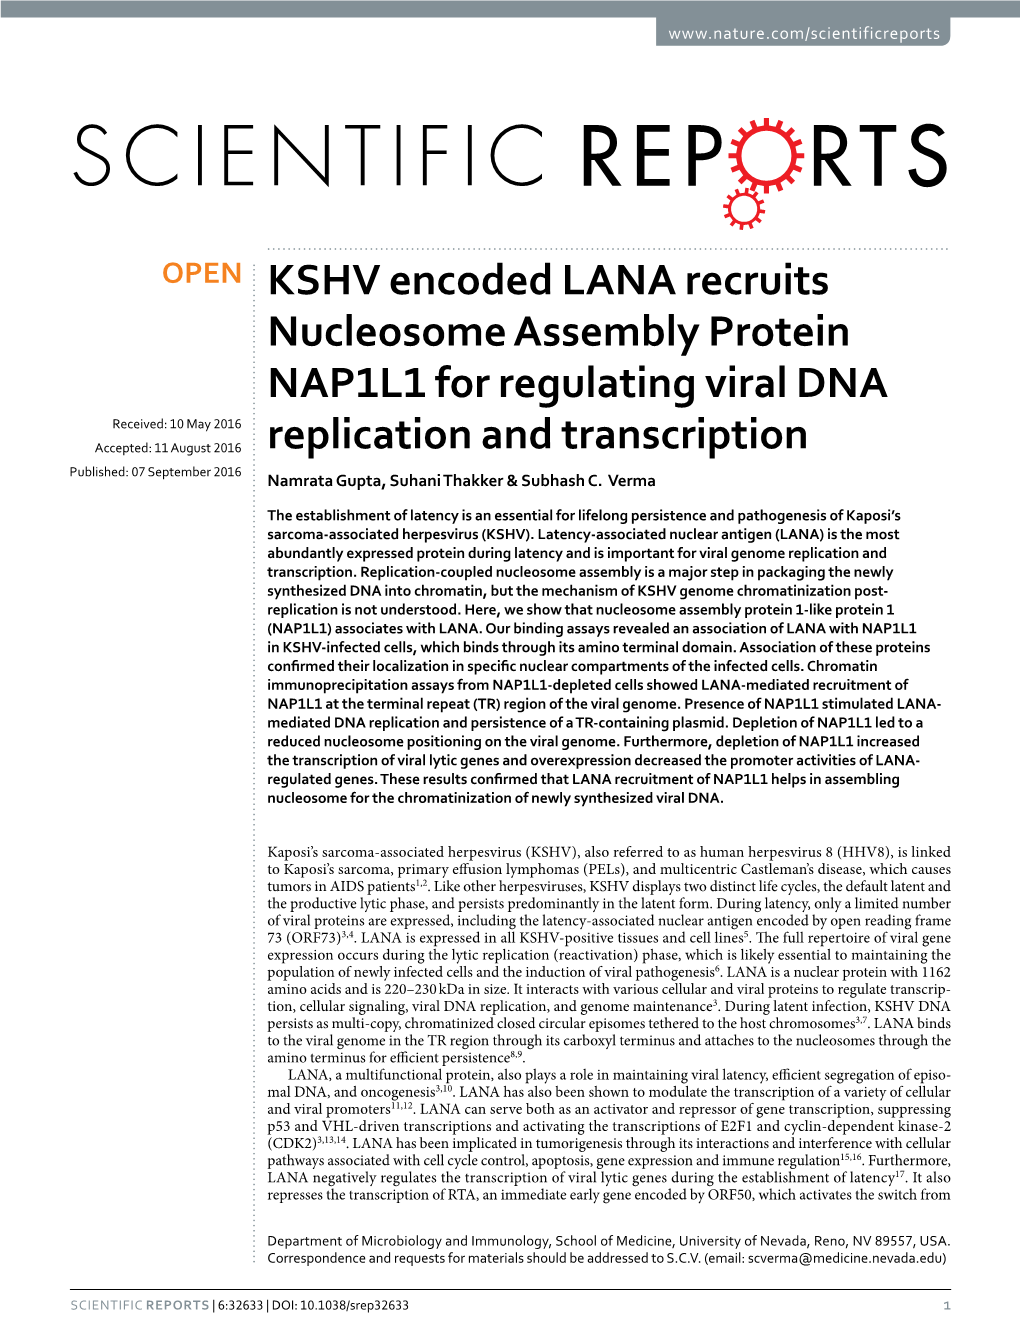 KSHV Encoded LANA Recruits Nucleosome Assembly Protein NAP1L1 for Regulating Viral DNA Replication and Transcription